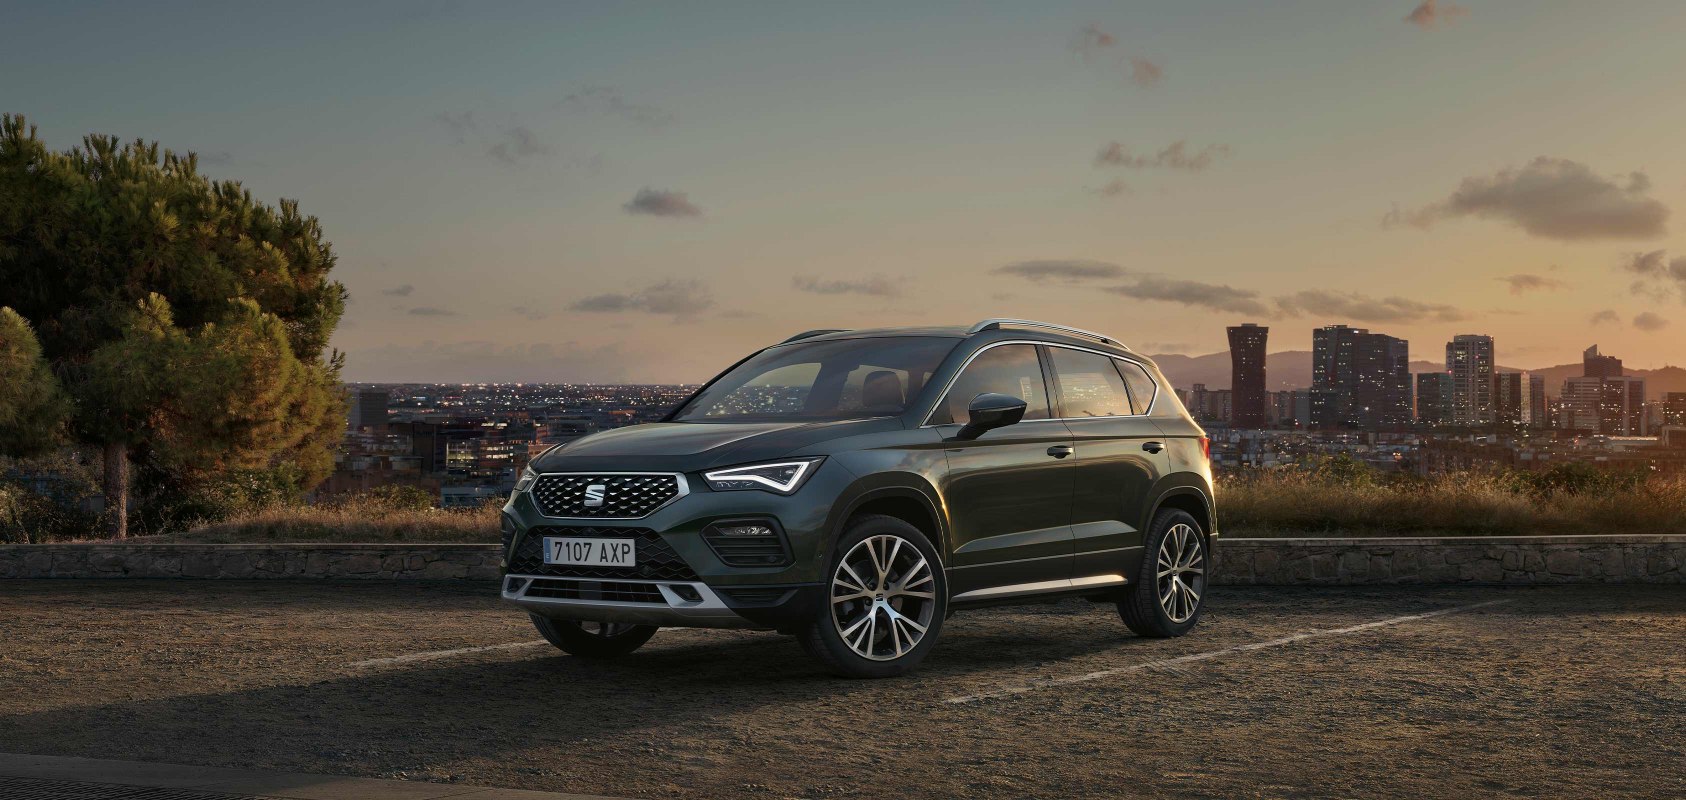 SEAT Ateca Xperience front view